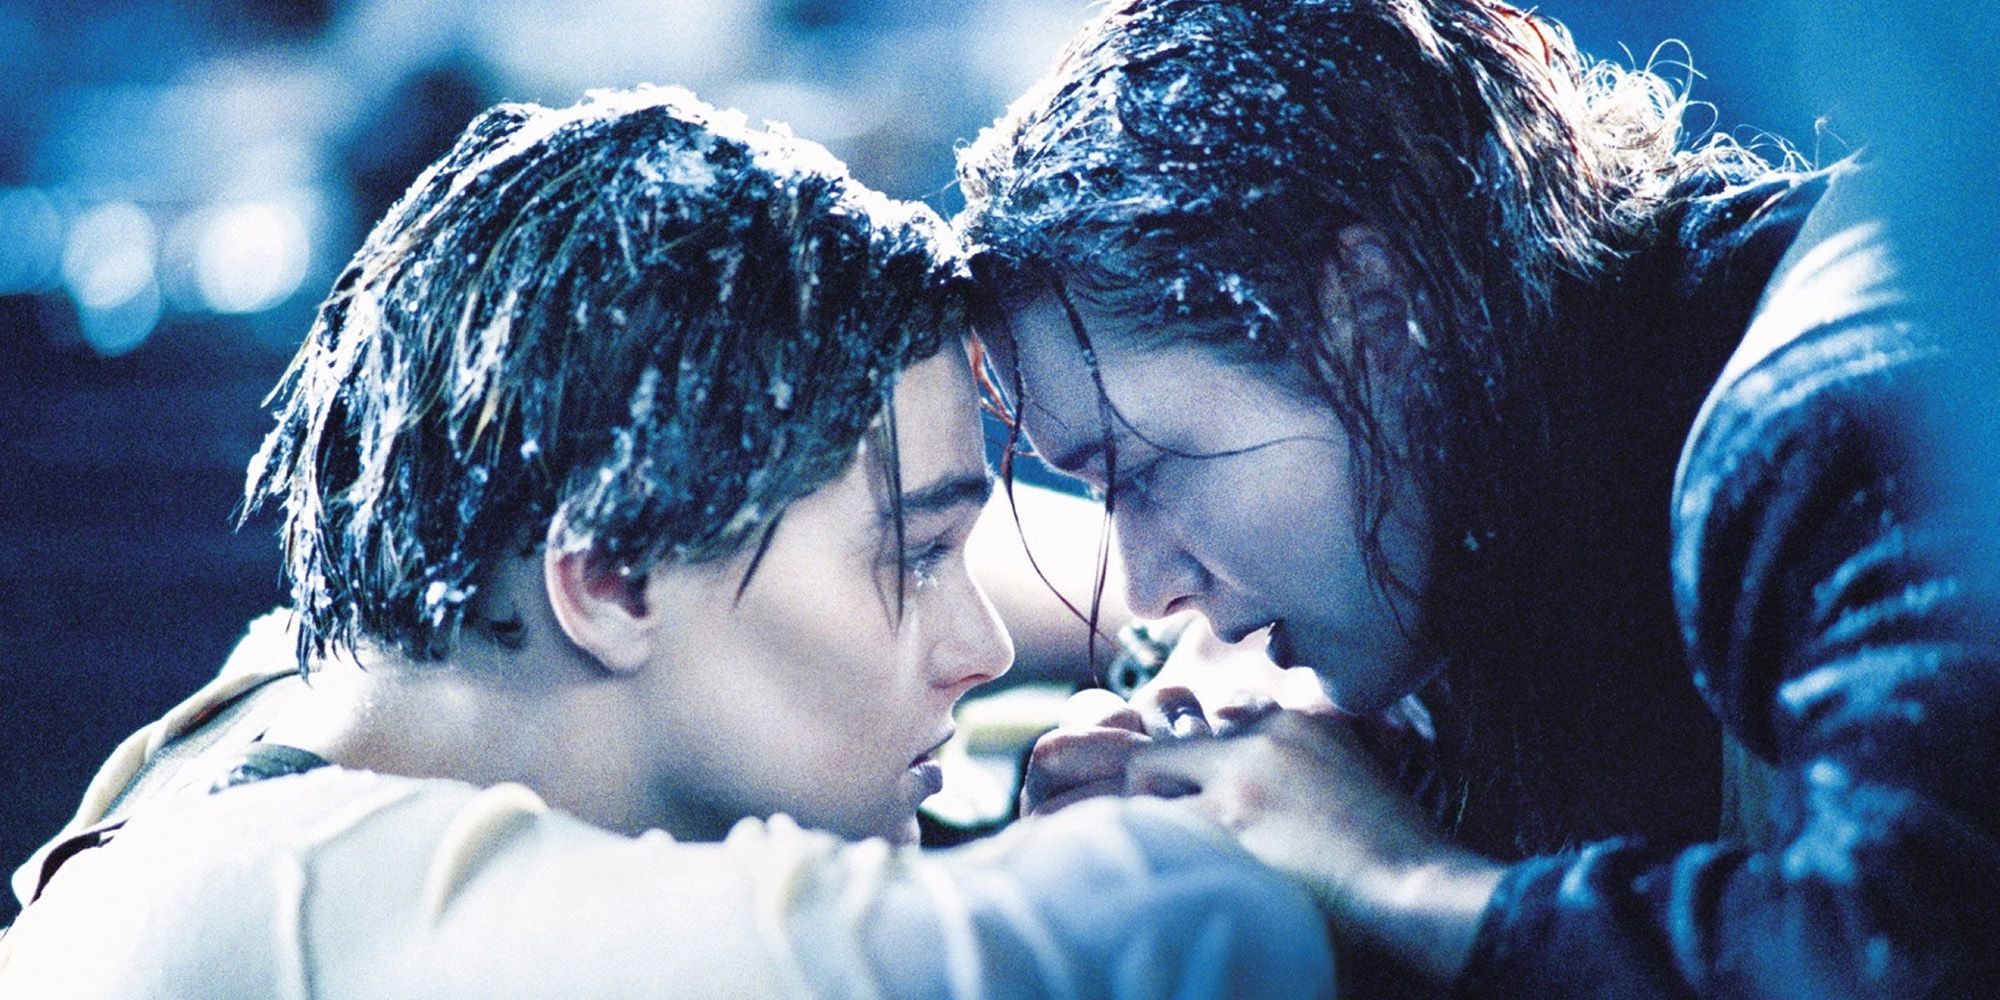 Titanic movie Kate Winslet and Leonardo DiCaprio in the water